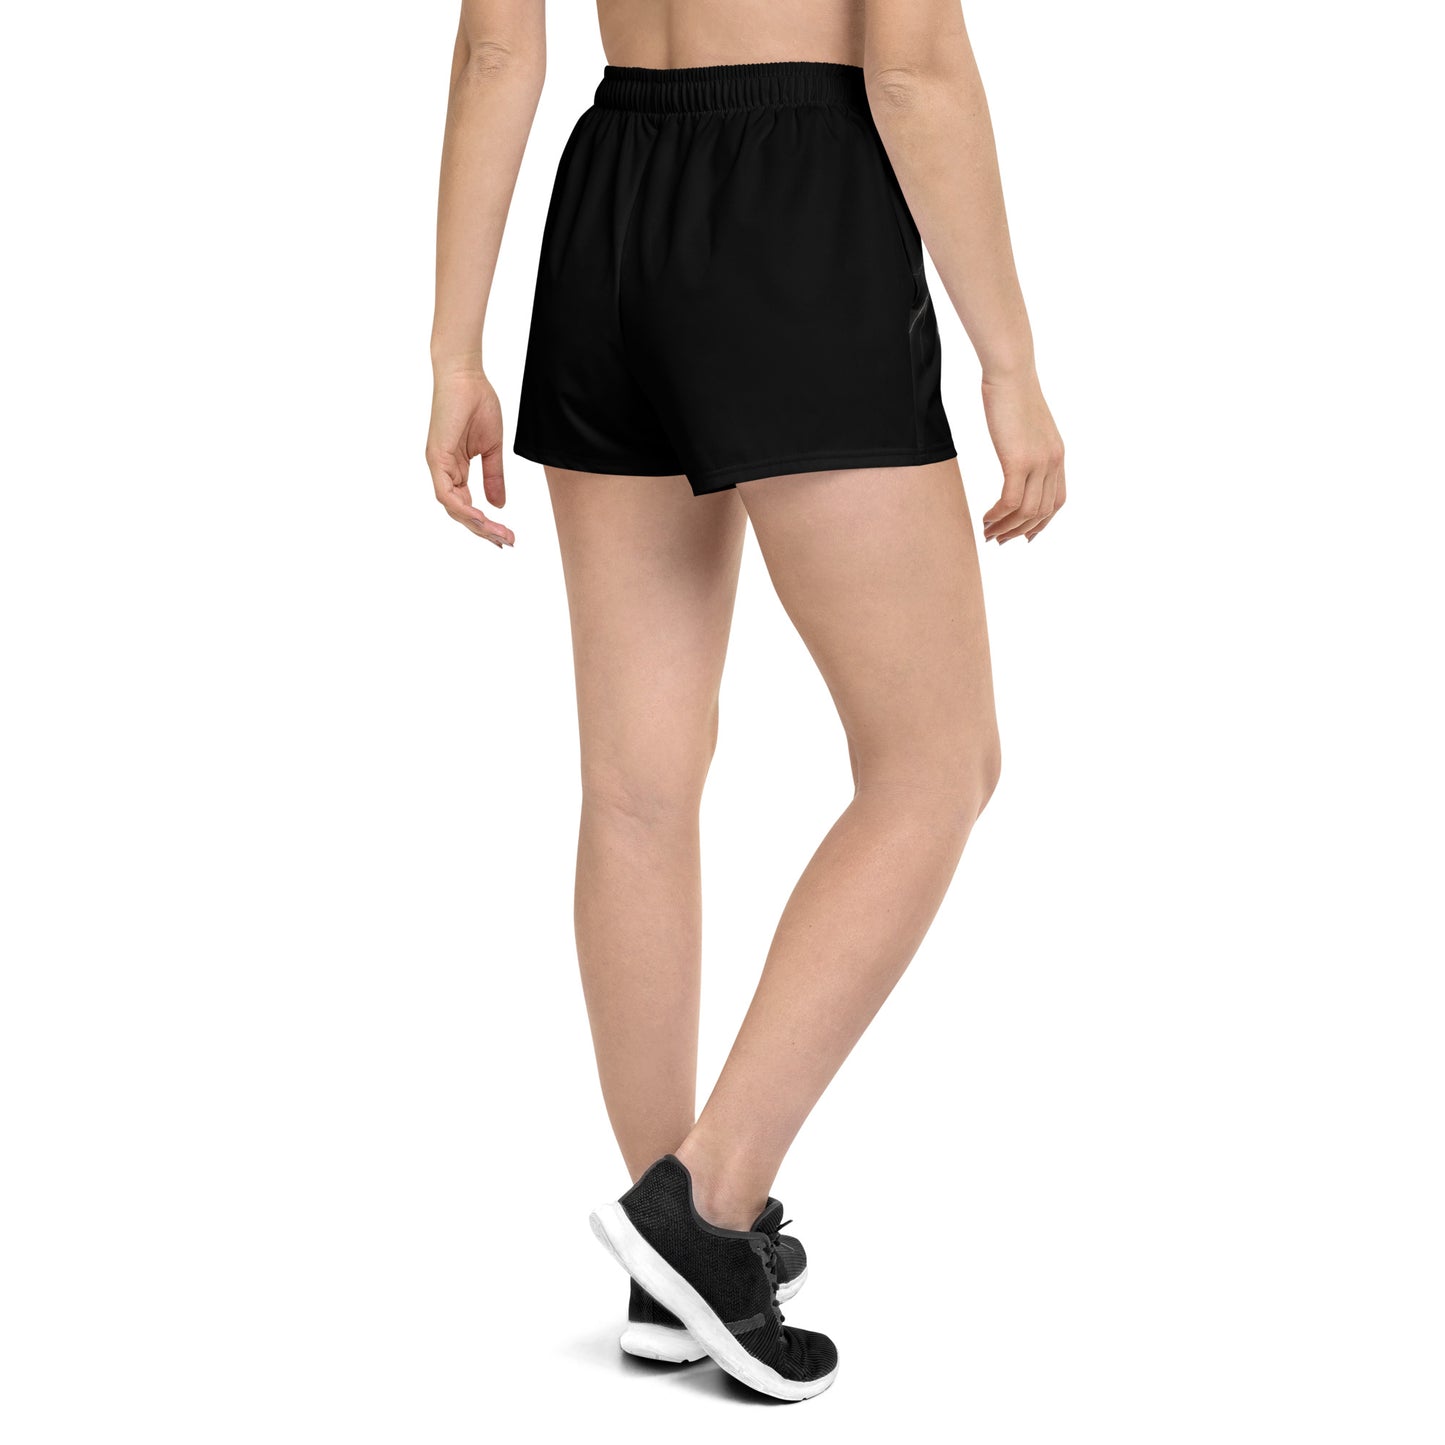 No Limits - Women’s Recycled Shorts